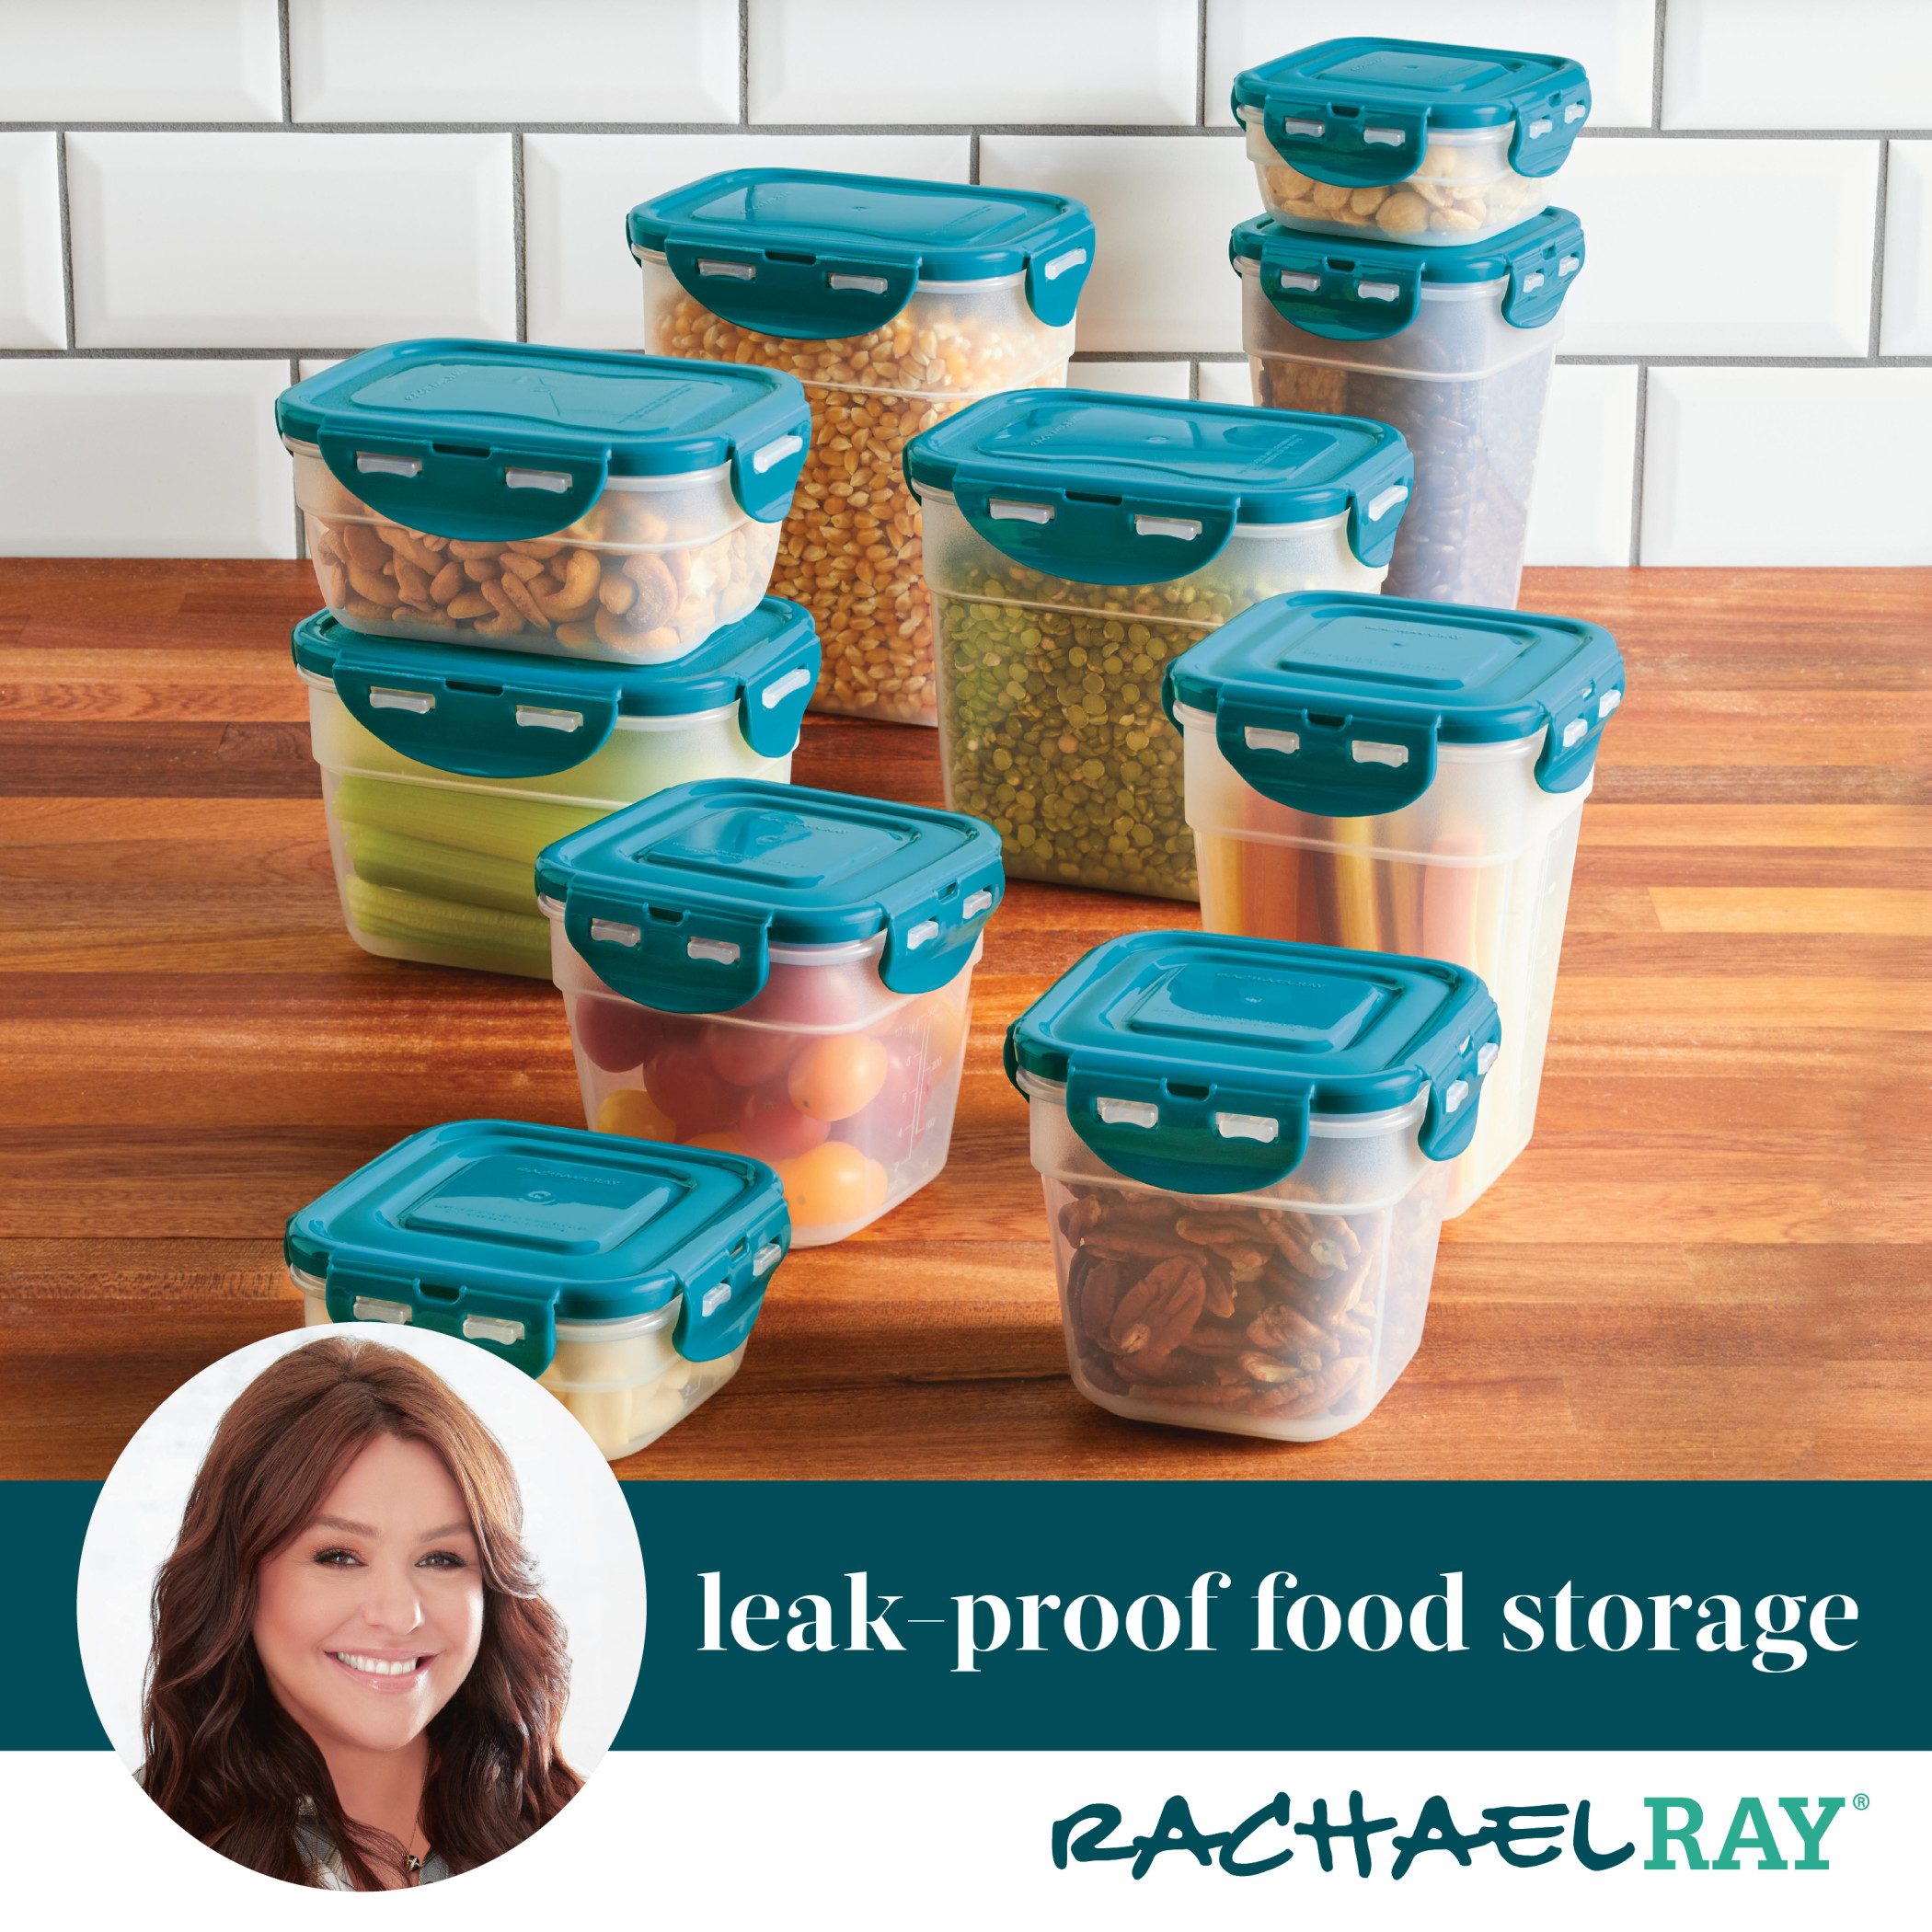 Rachael Ray Leak-Proof Stacking Food Storage Container Set, 20-Piece, Teal Lids - image 3 of 17